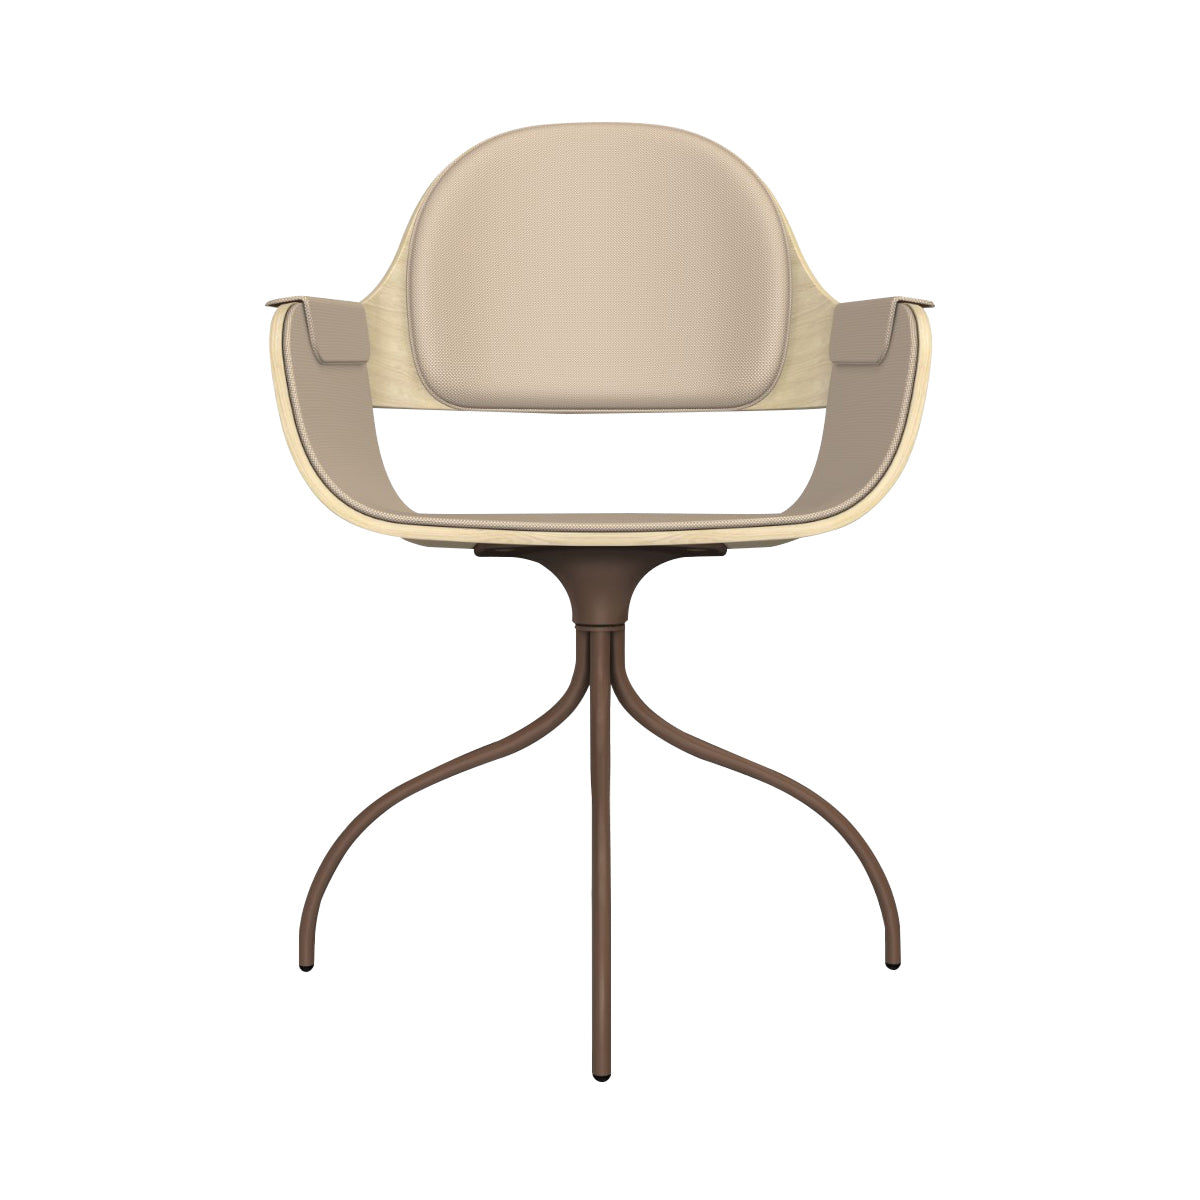 Showtime Nude Chair with Swivel Base: Interior Seat + Backrest Cushion + Natural Ash + Pale Brown